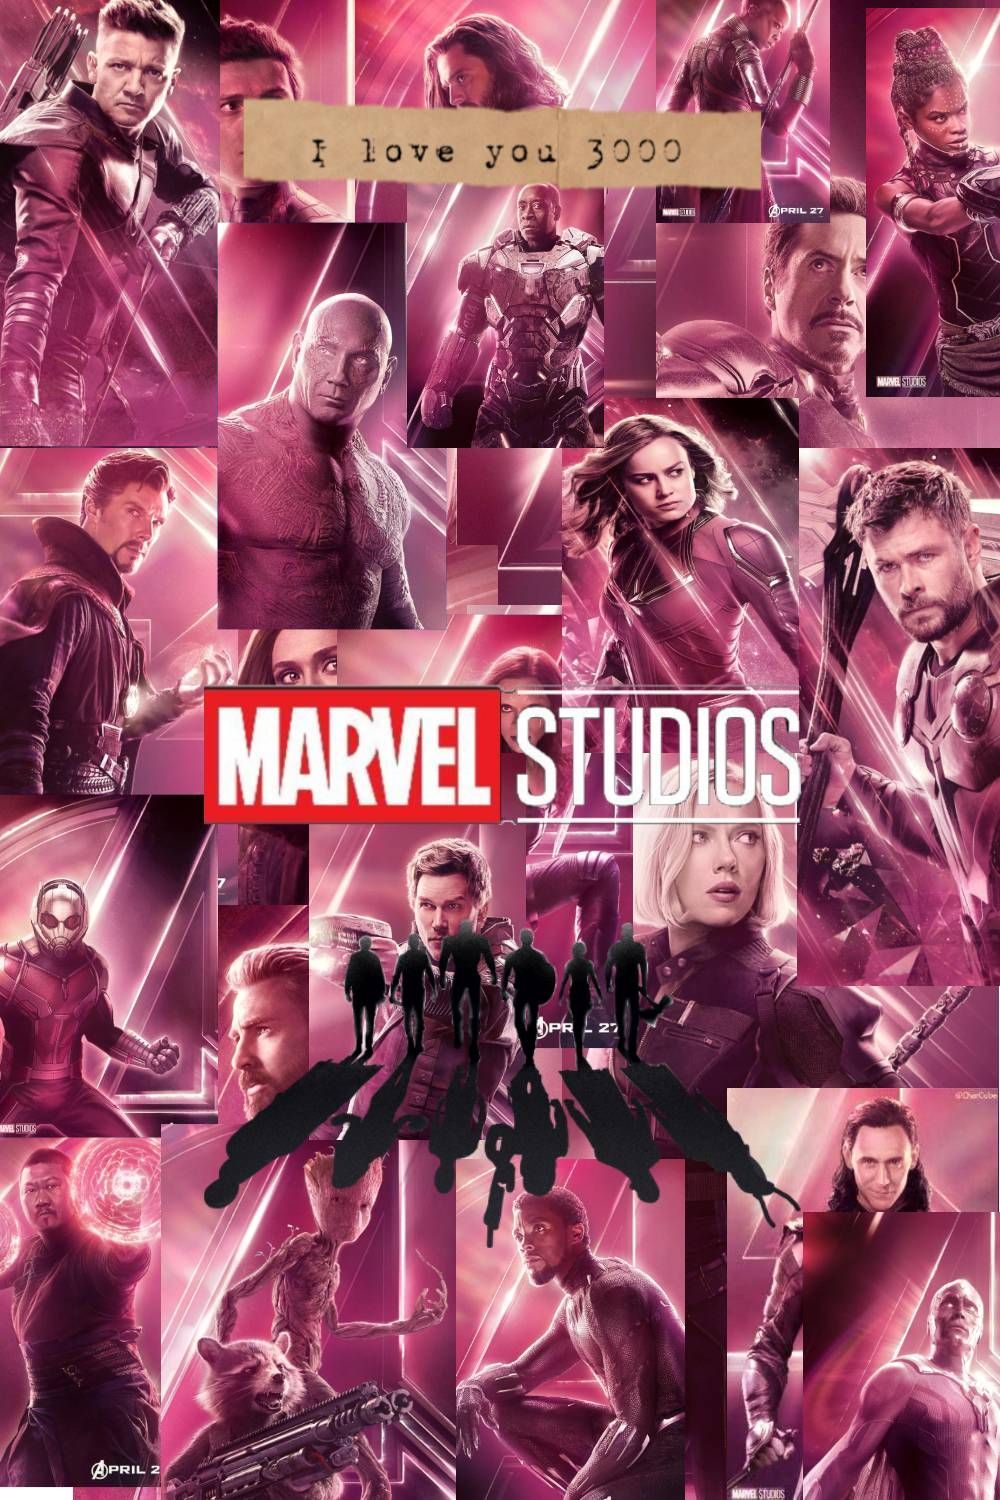 Marvel Collage Wallpapers Wallpaper Cave